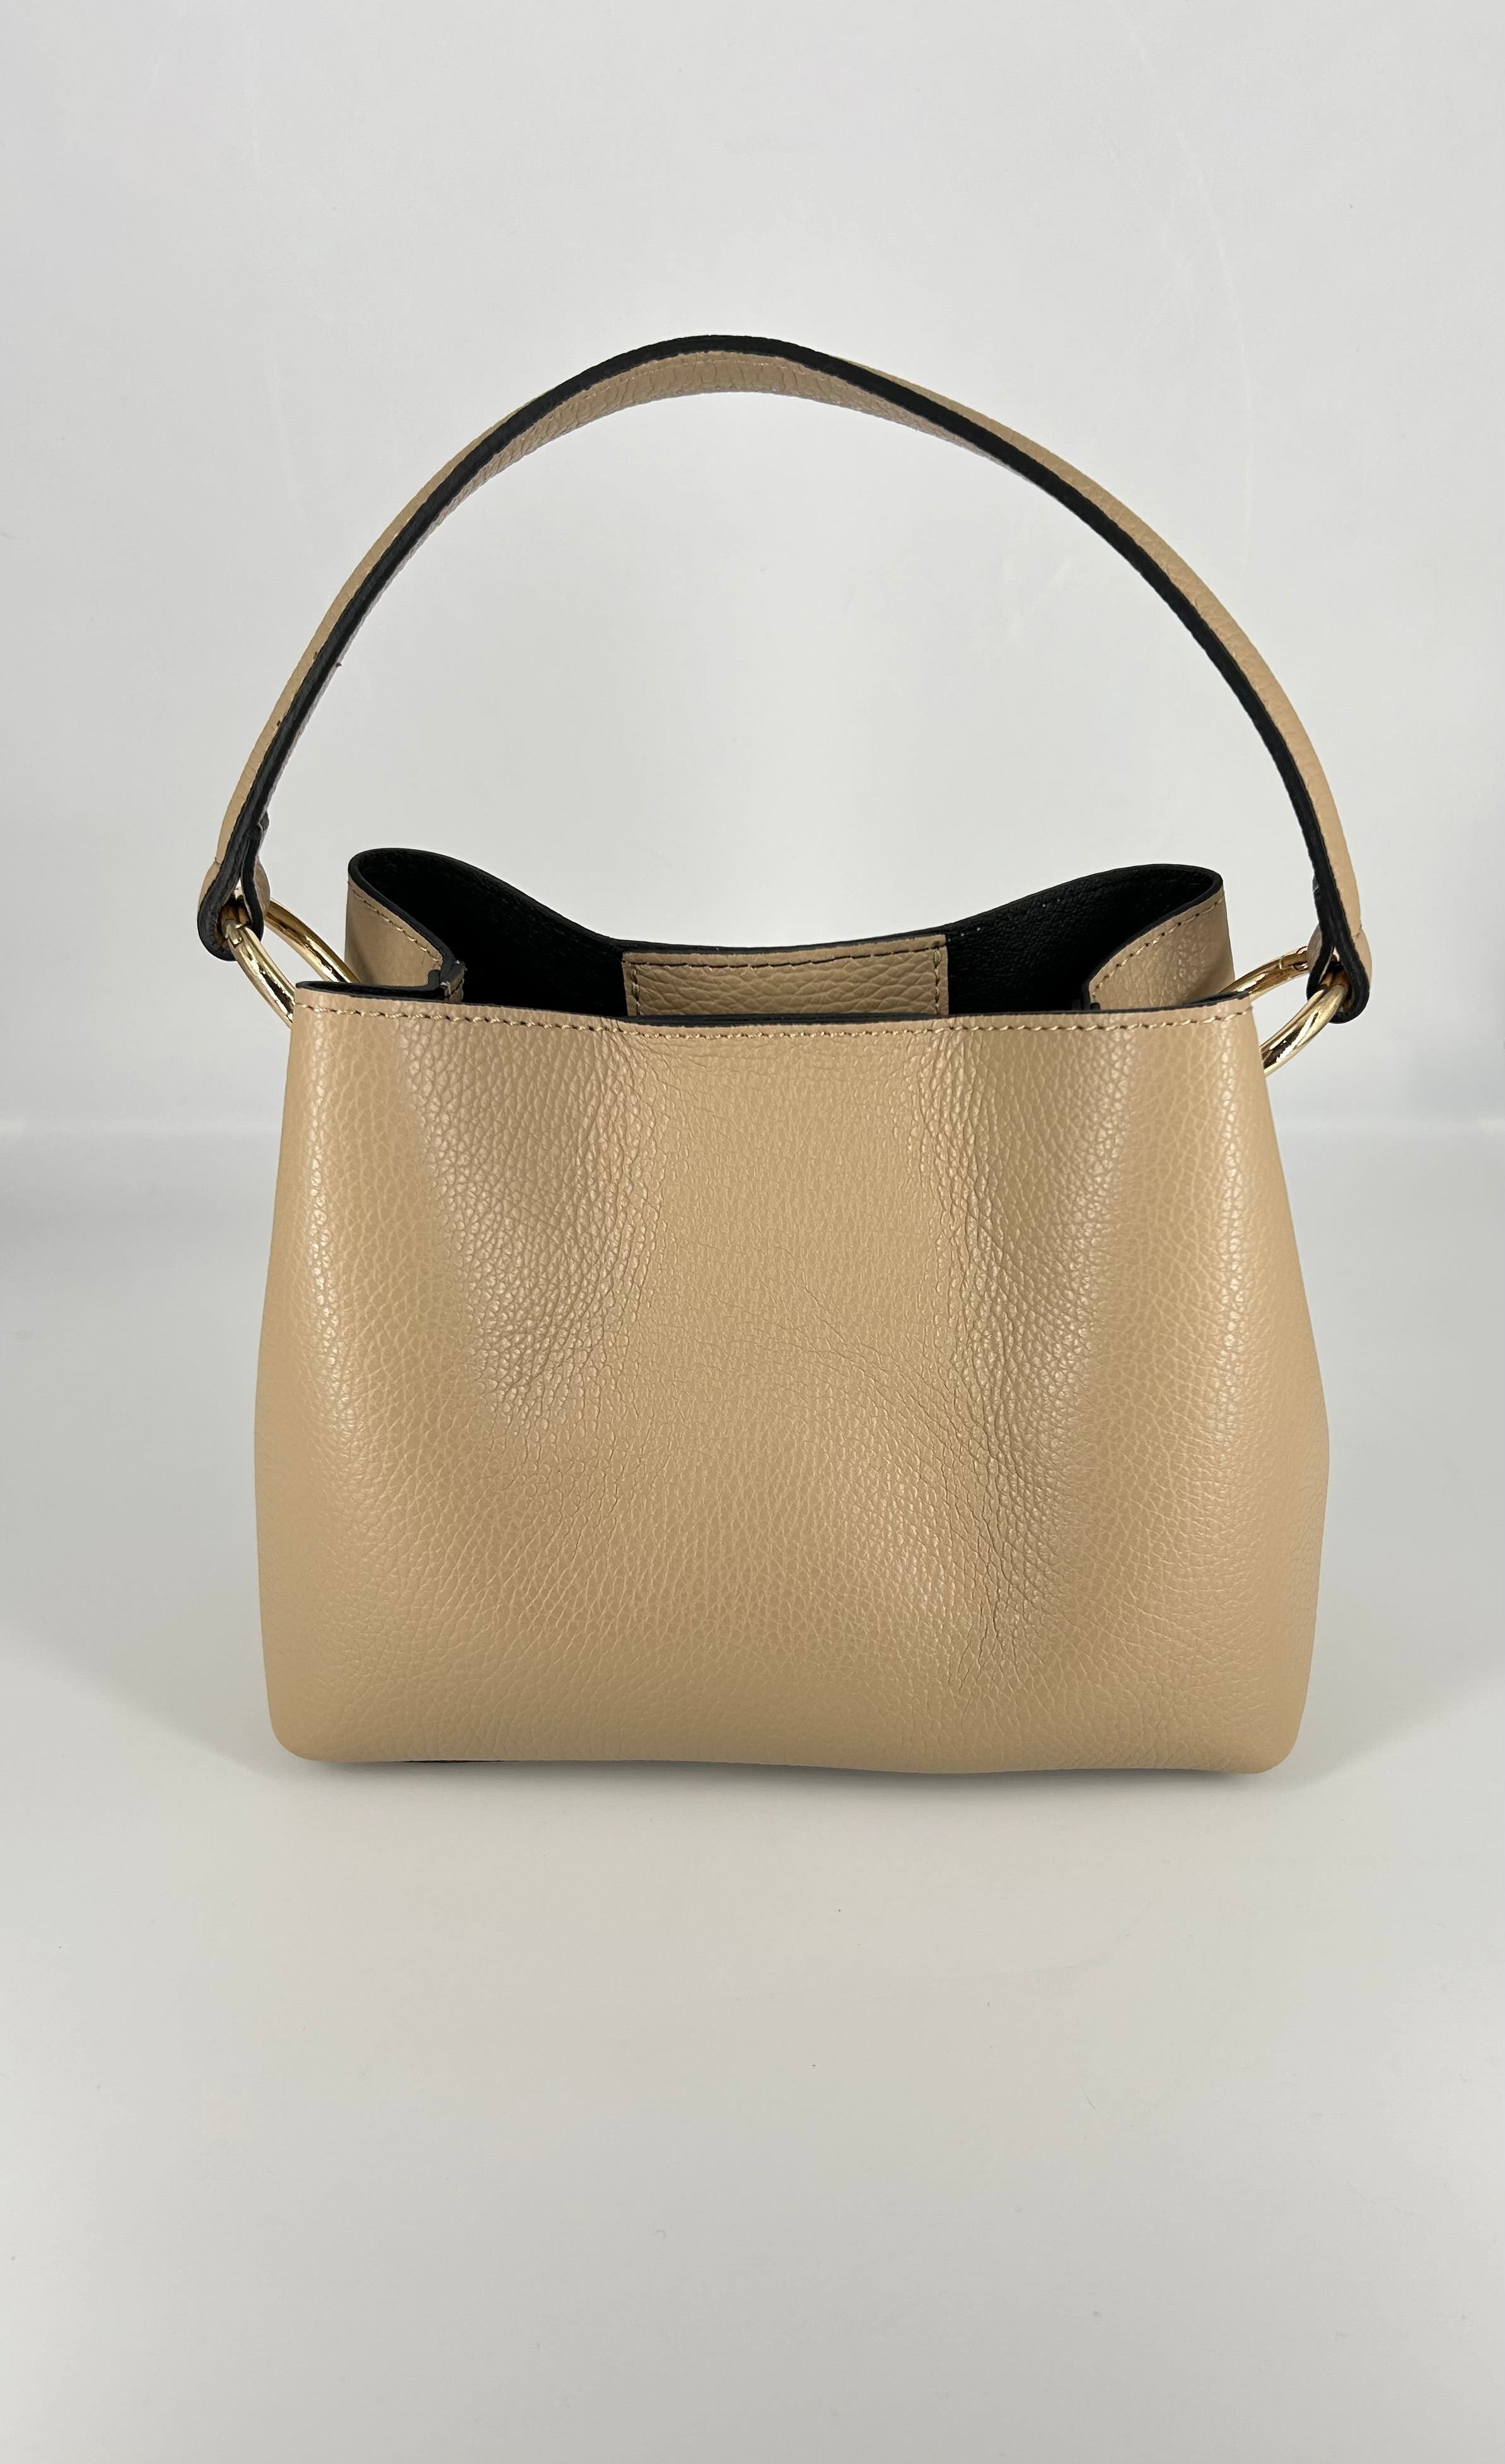 HANDBAG LEATHER WITH RING DETAIL- SAND